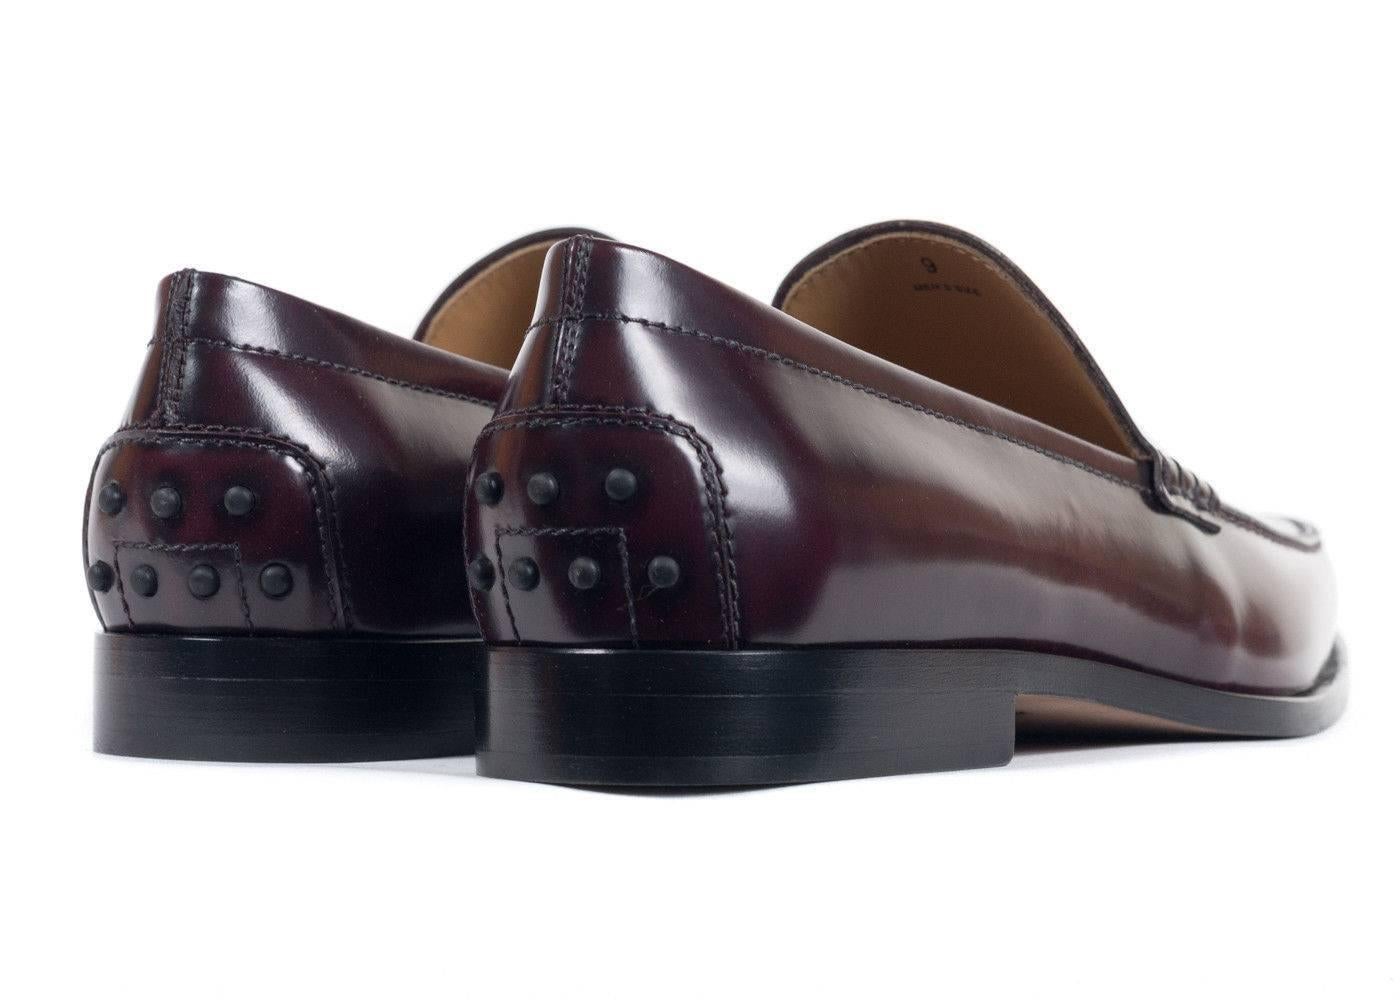 Tods classic penny loafers crafted in burgundy calfskin leather for an ultra smooth look to these shoes. These loafers are the perfect pair to wear to work or as an everyday shoe. Pair it with your favorite black trousers and or dark washed jeans